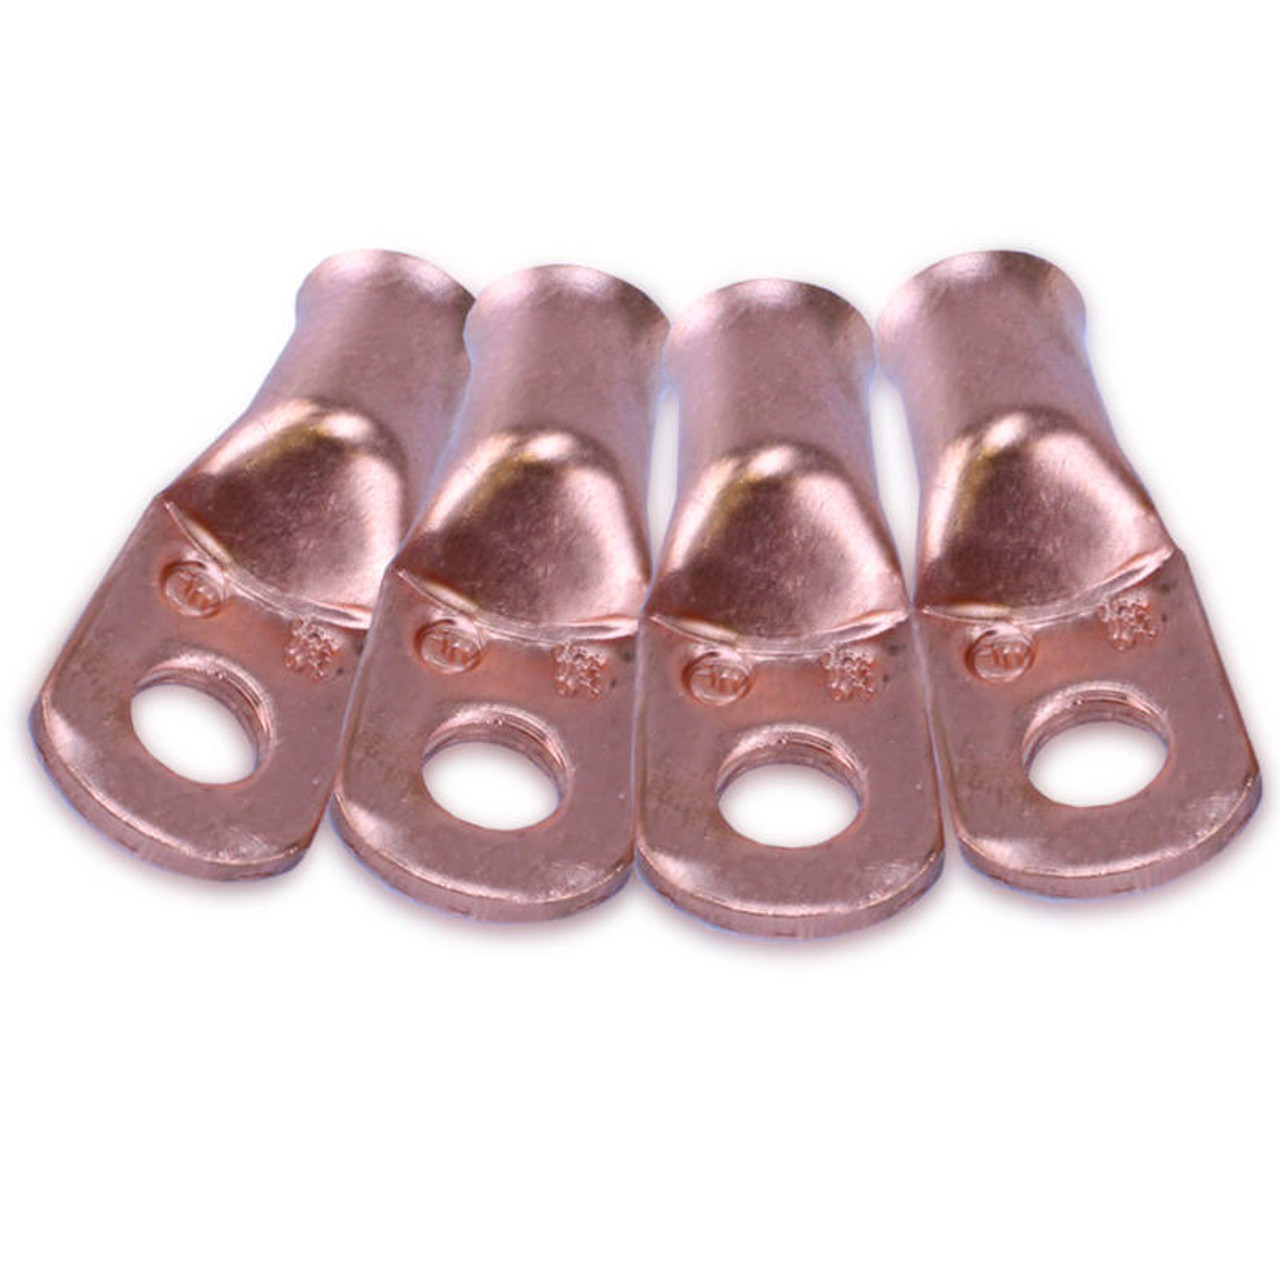 Mechman 1/0 Gauge Copper Cable End 3/8in Hole 4 Pack - MECCR1038